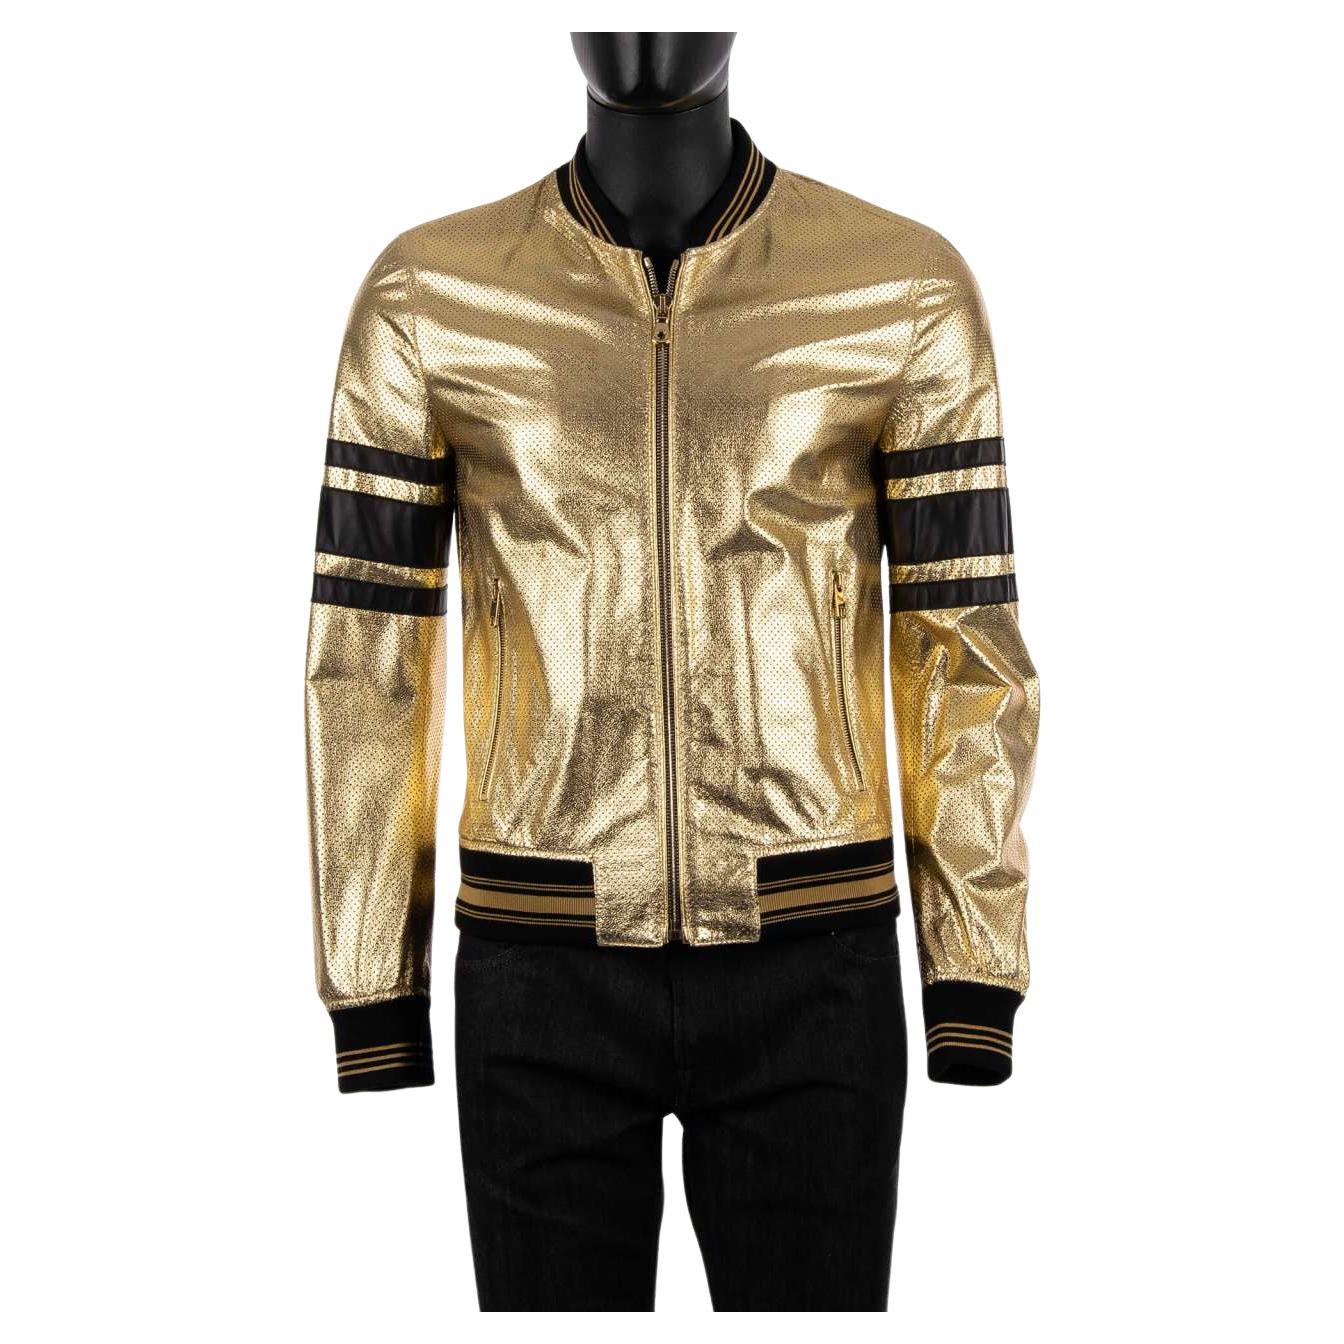 Dolce & Gabbana Perforated Leather Jacket Gold Black 46 For Sale